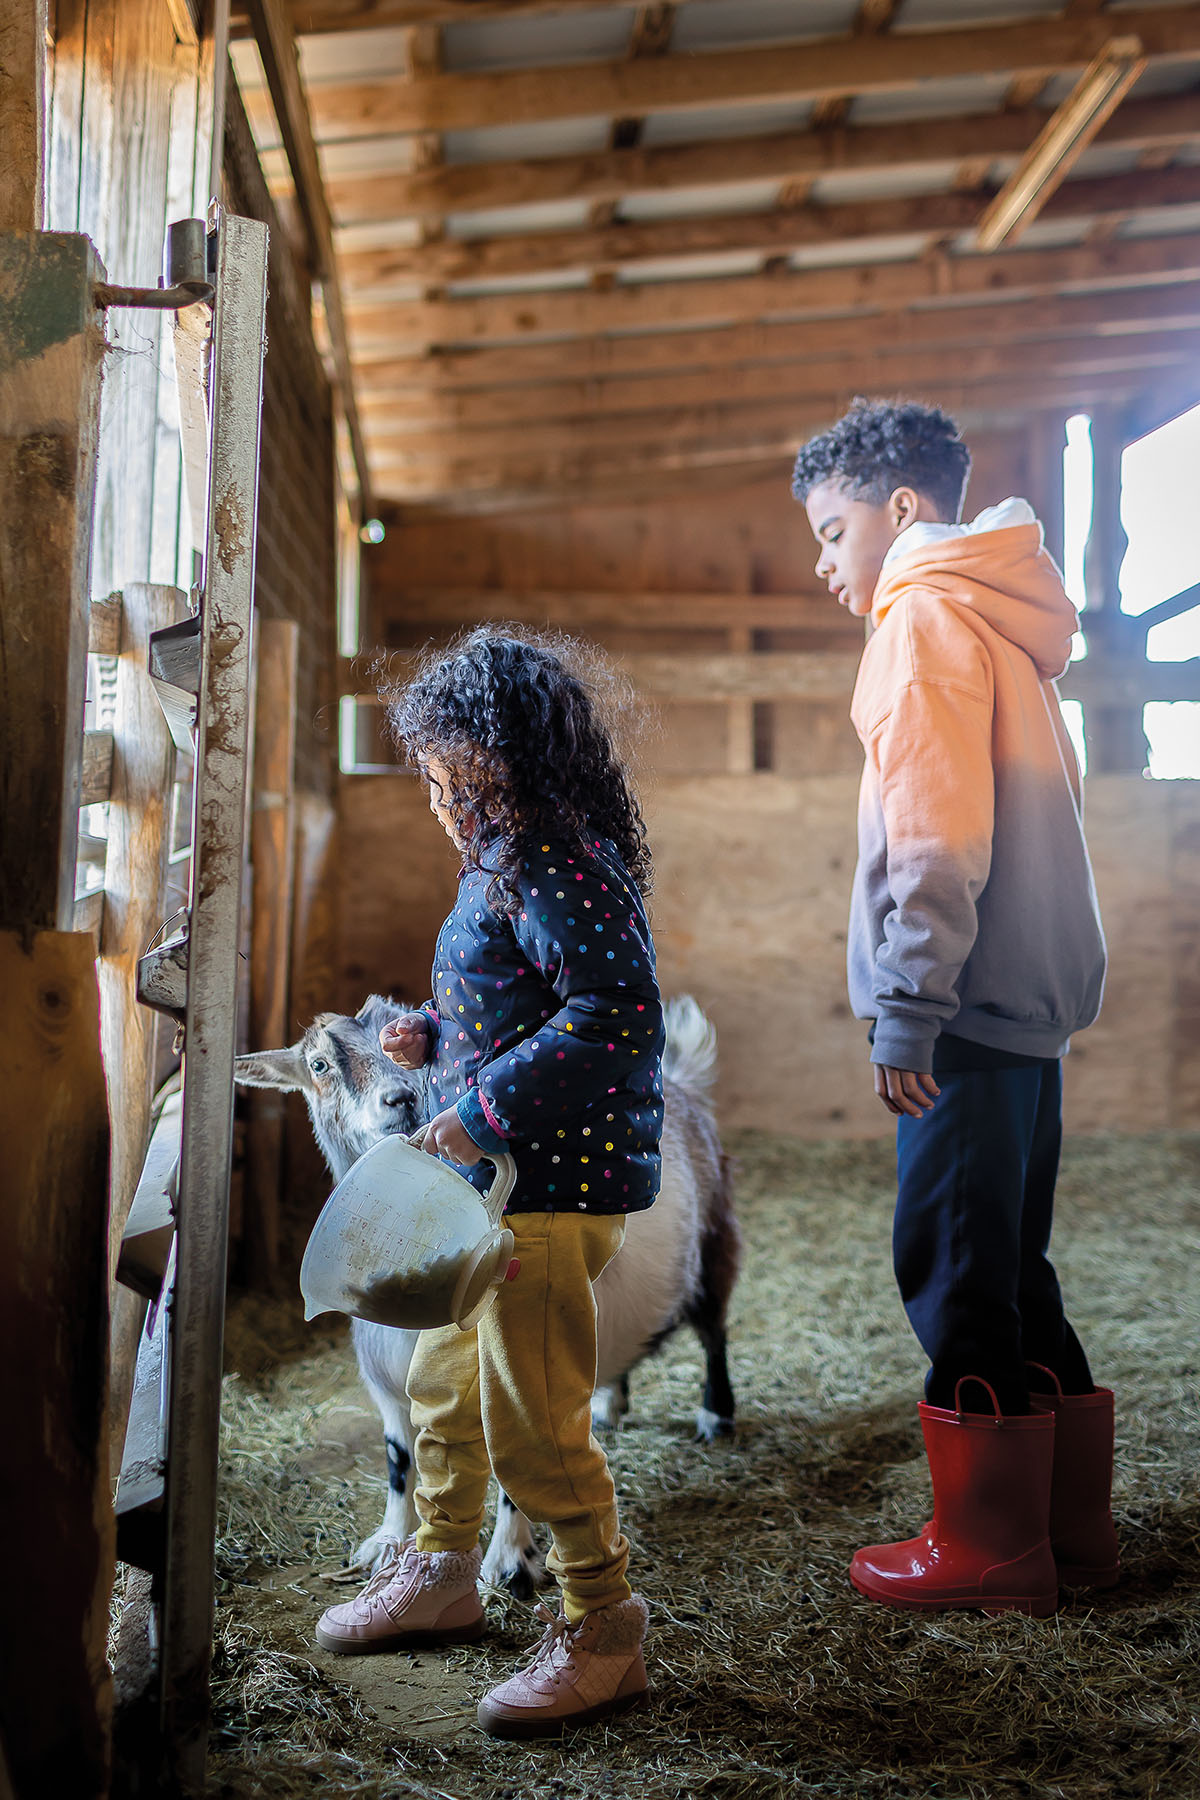 Two children feed a small white and gray goat in a barn